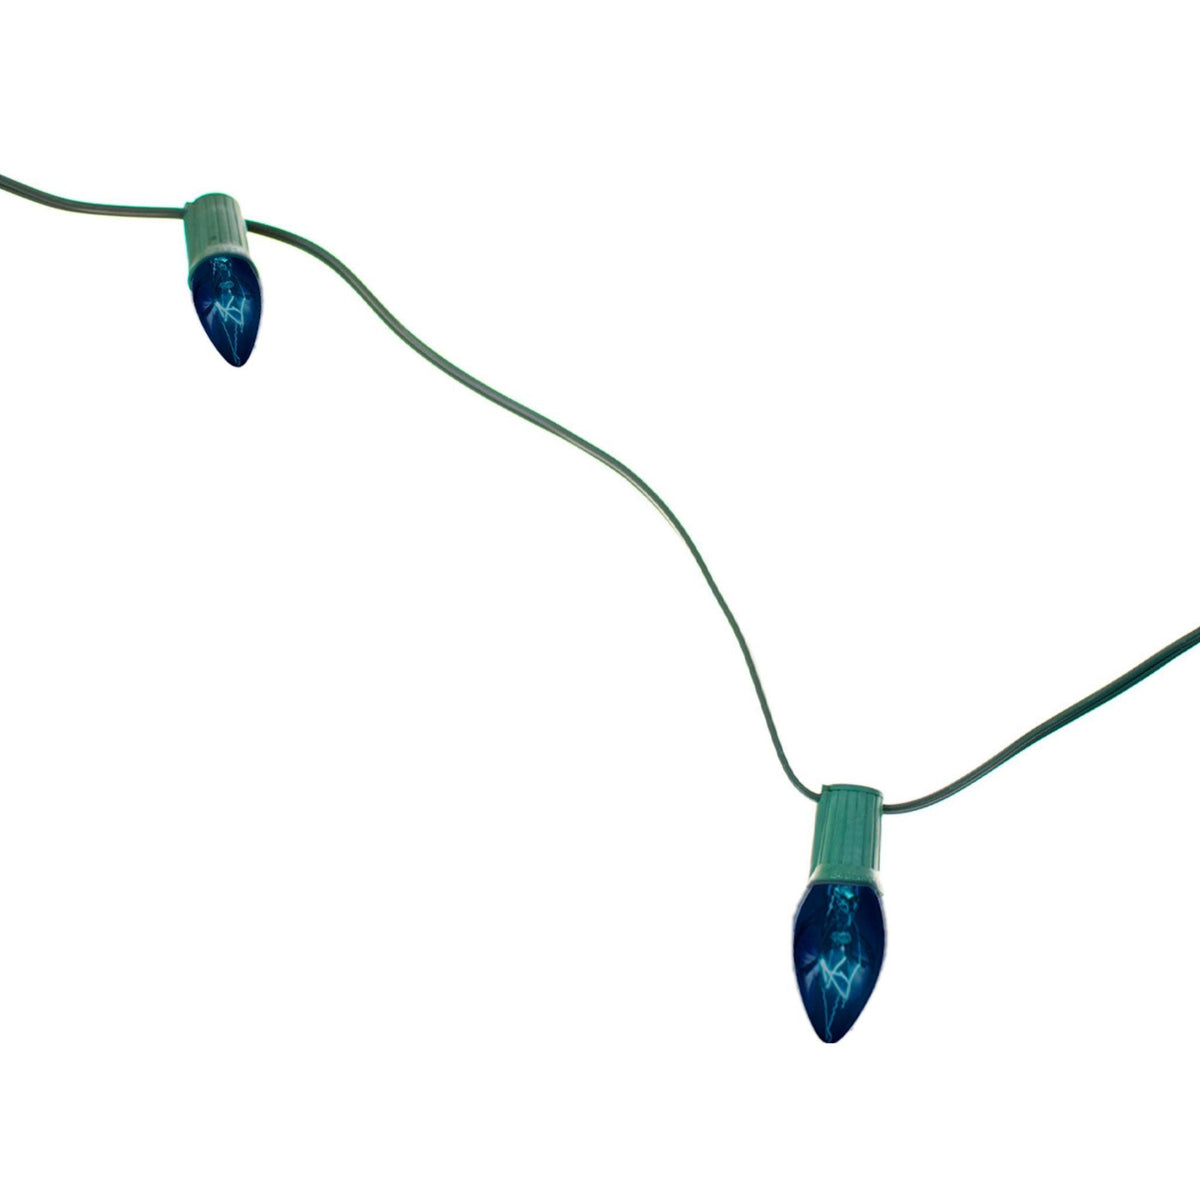 Patio String Light Cords are sold in 25FT - 50FT Lengths.  Custom length cords fit every size patio and backyard!   Shop for Green and White Wire Sets now at leedisplay.com